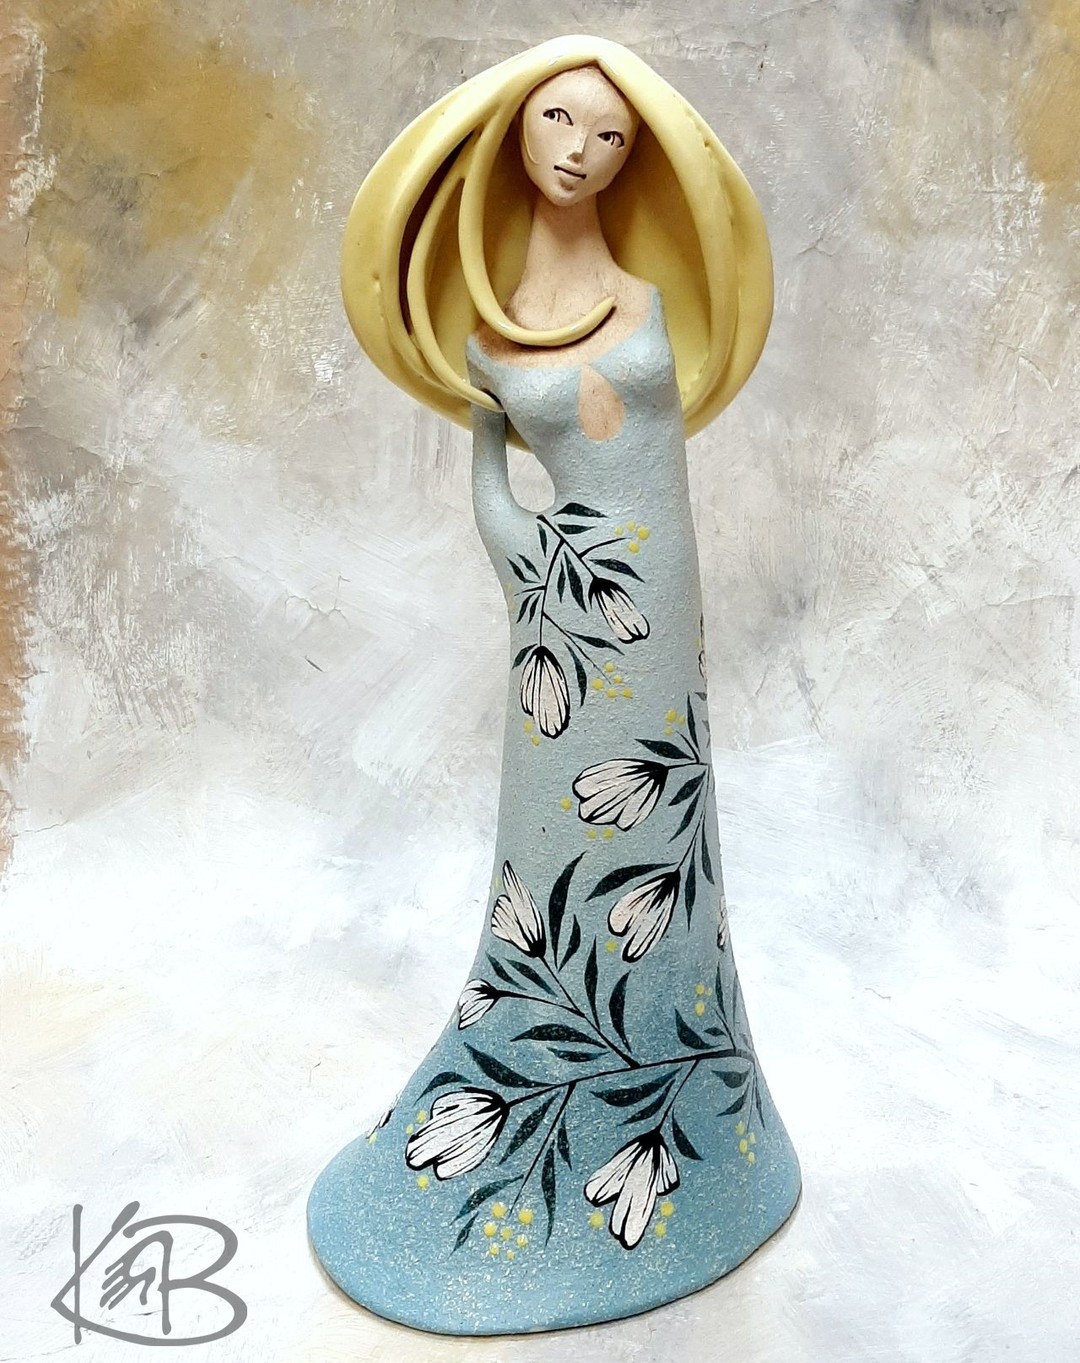 Gorgeous Female Ceramic Sculptures By Katerina B (4)